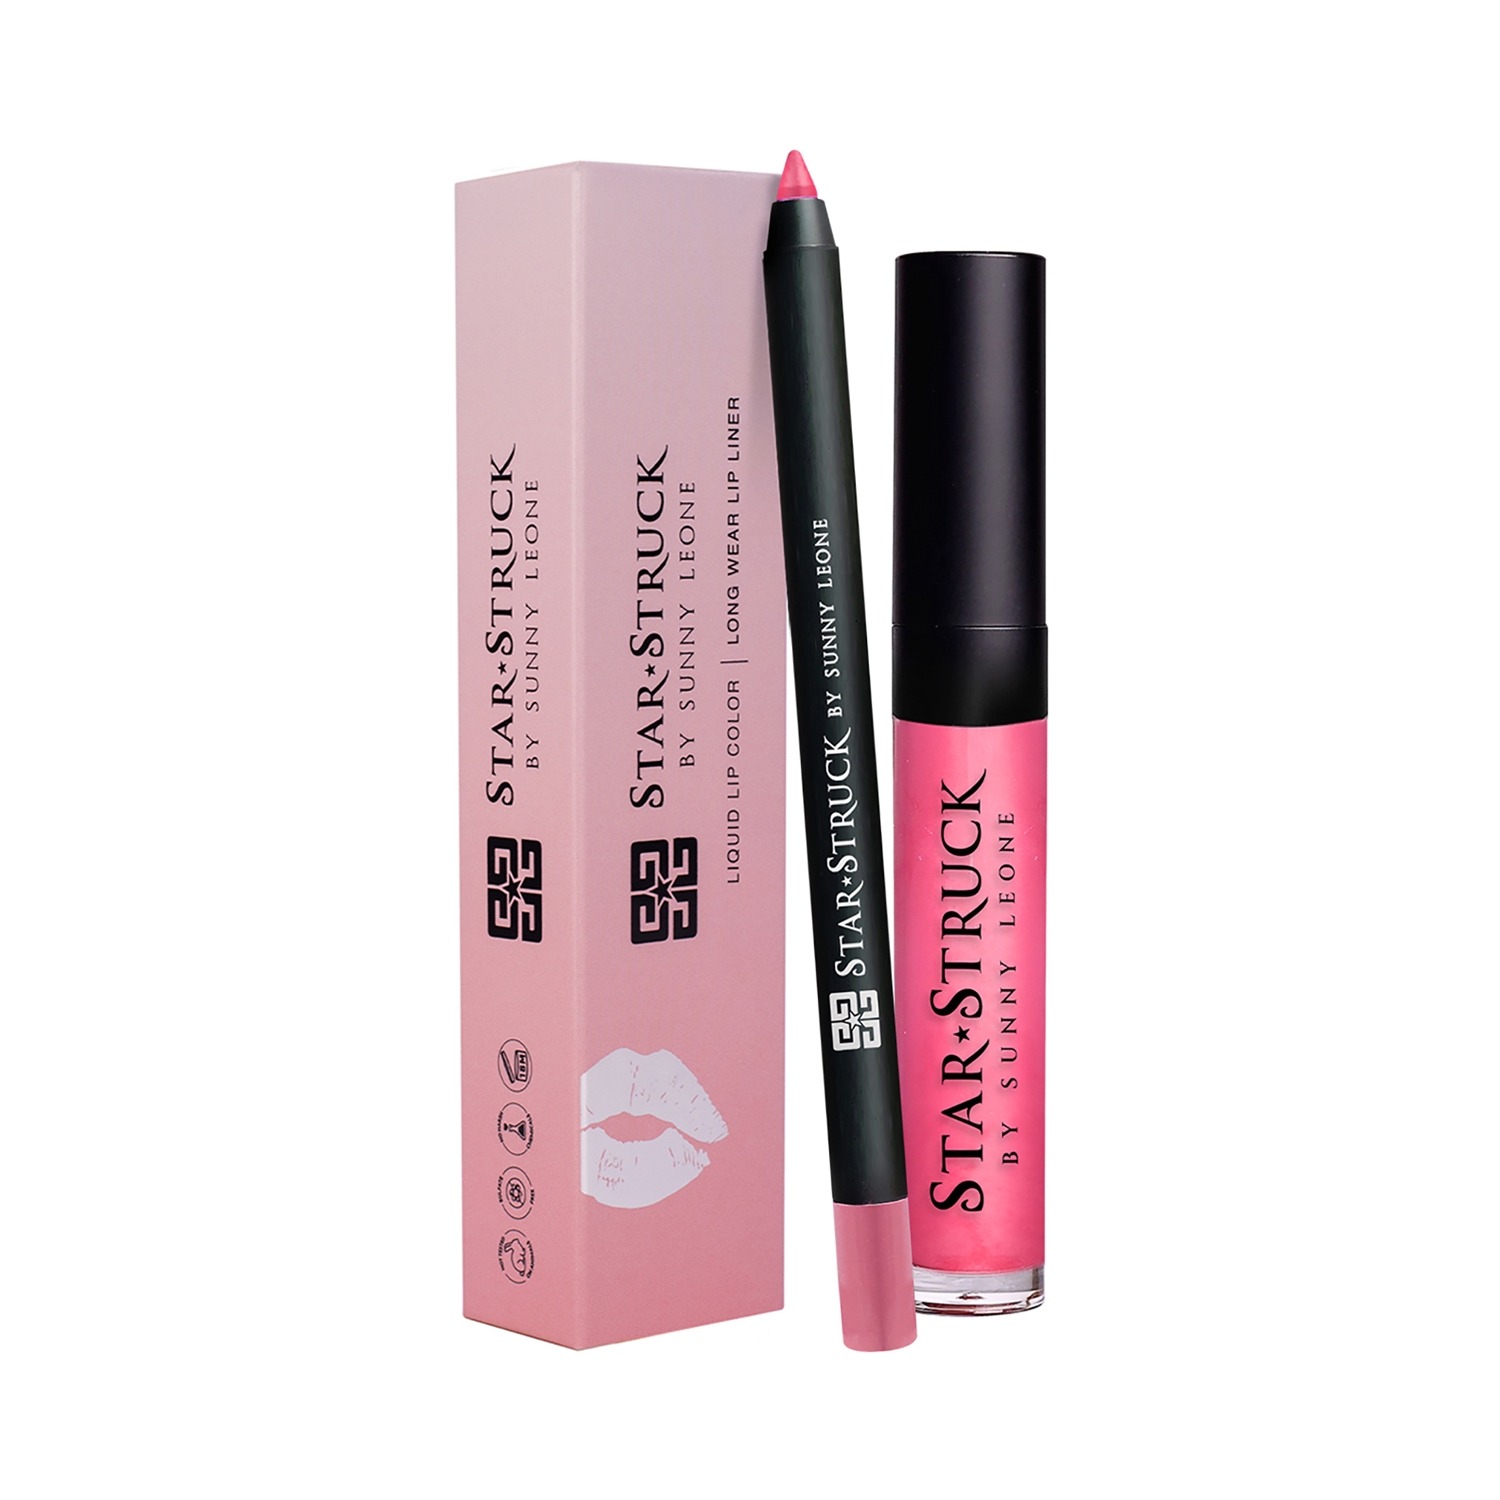 Star Struck by Sunny Leone | Star Struck by Sunny Leone Long Wear Lip Liner And Lip Gloss - Pink Peony (2 Pcs)